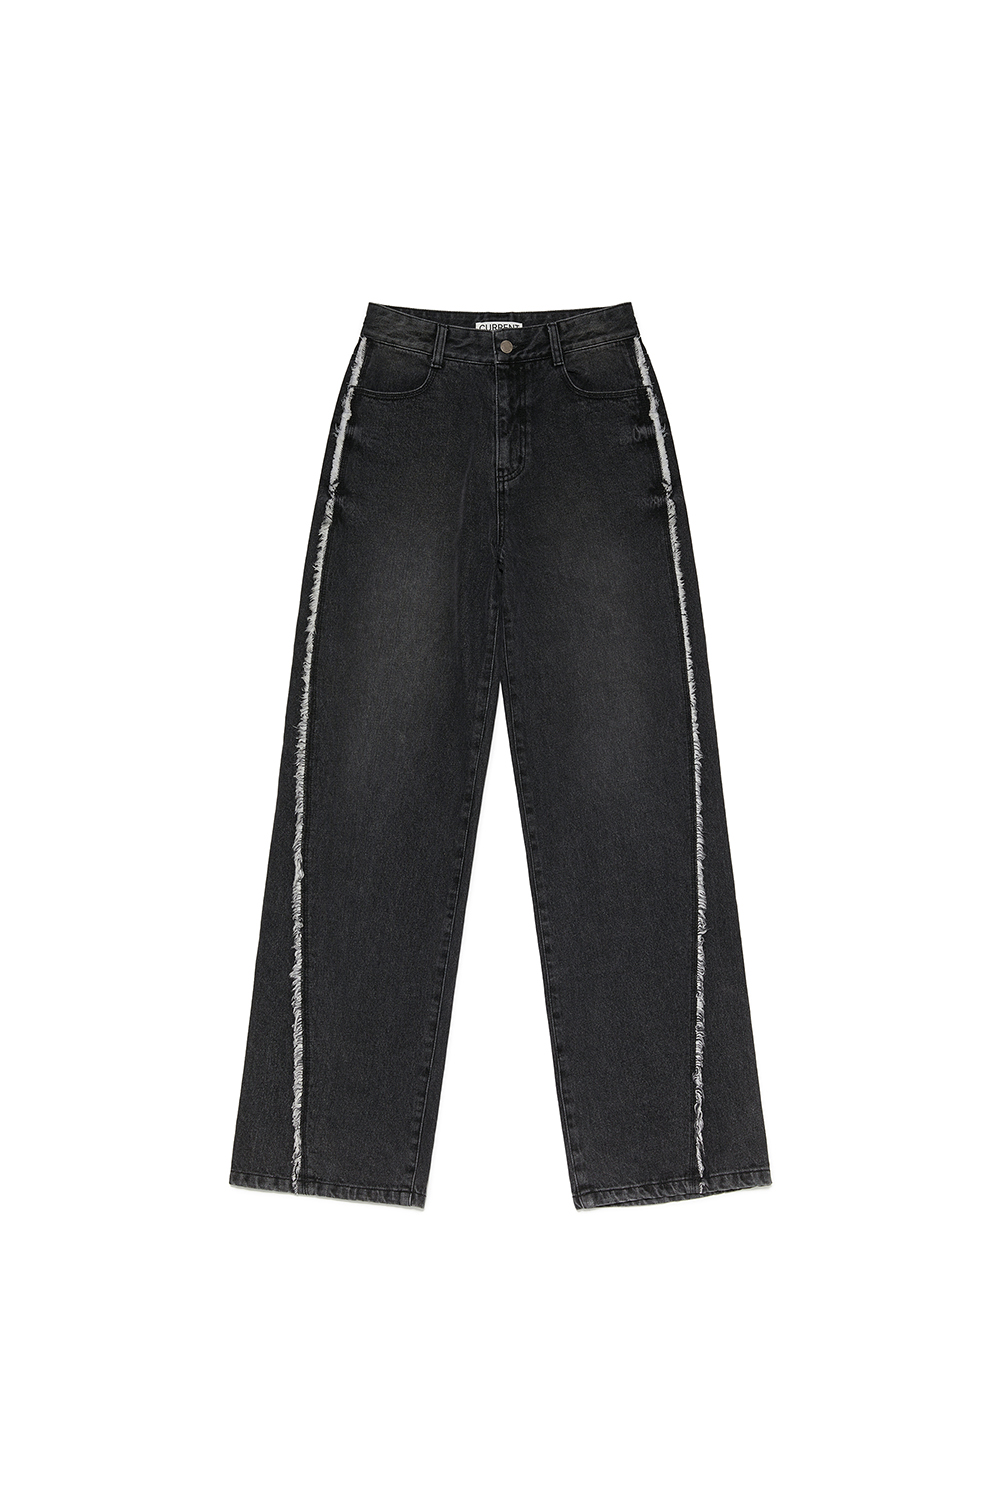 CURVED DYING JEANS [BLACK]		